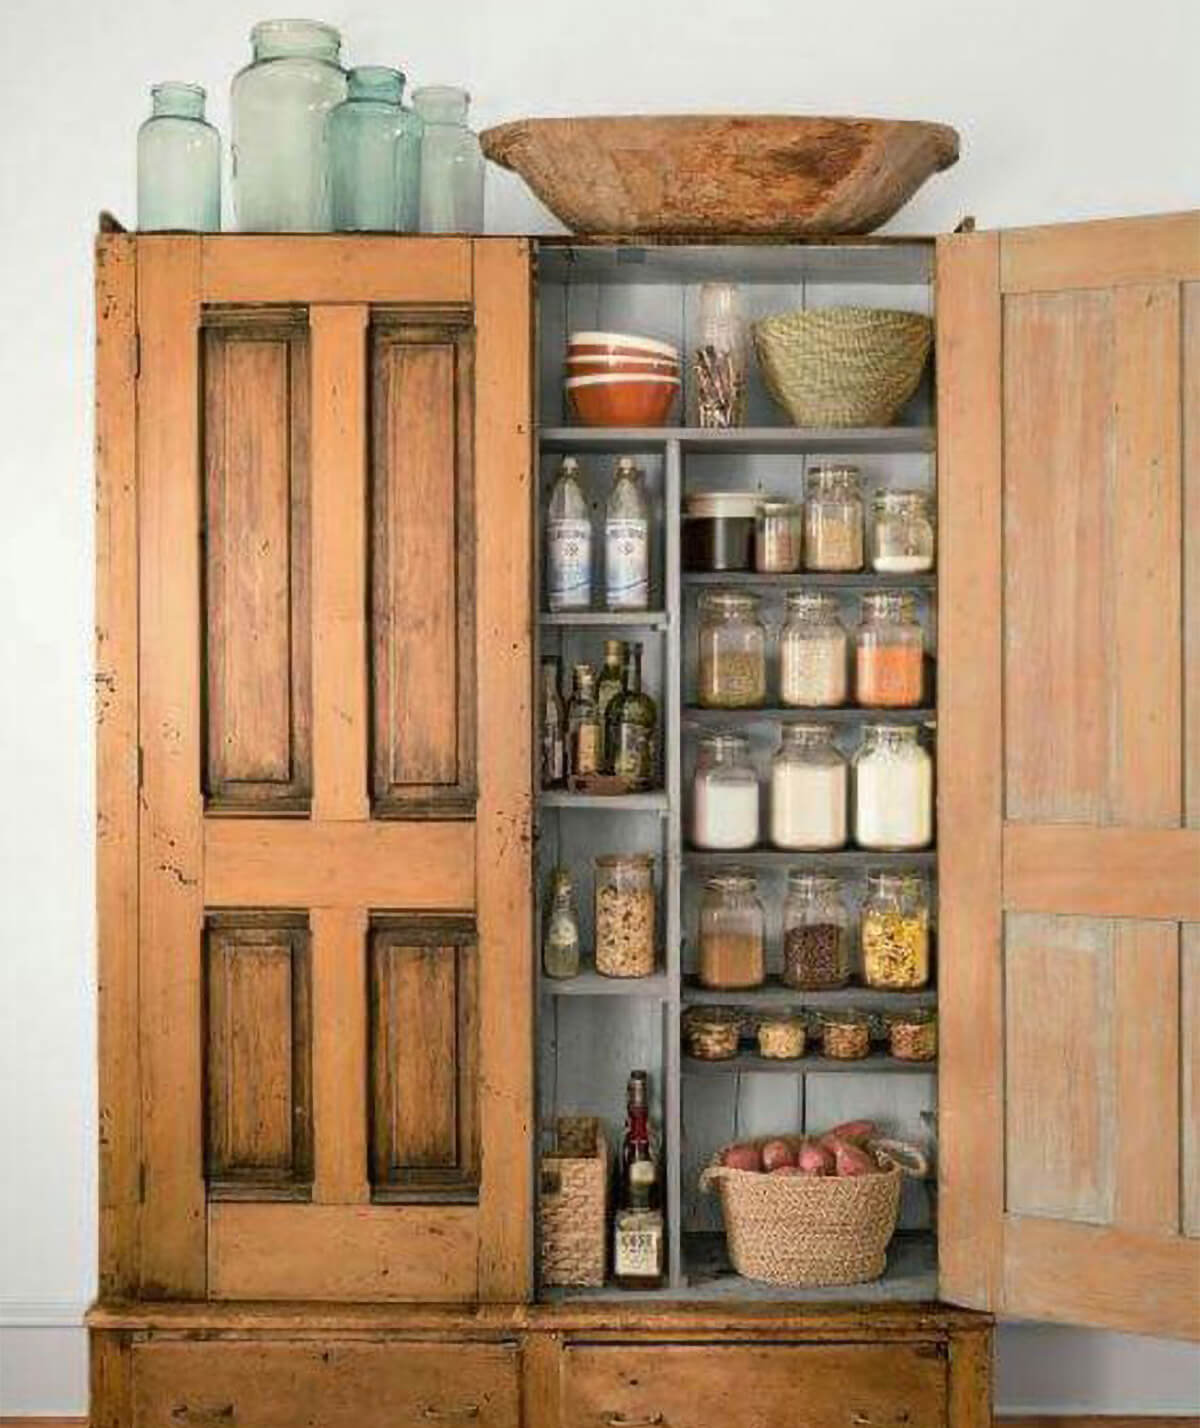 An antique larder cabinet that was refurbished into a pantry.